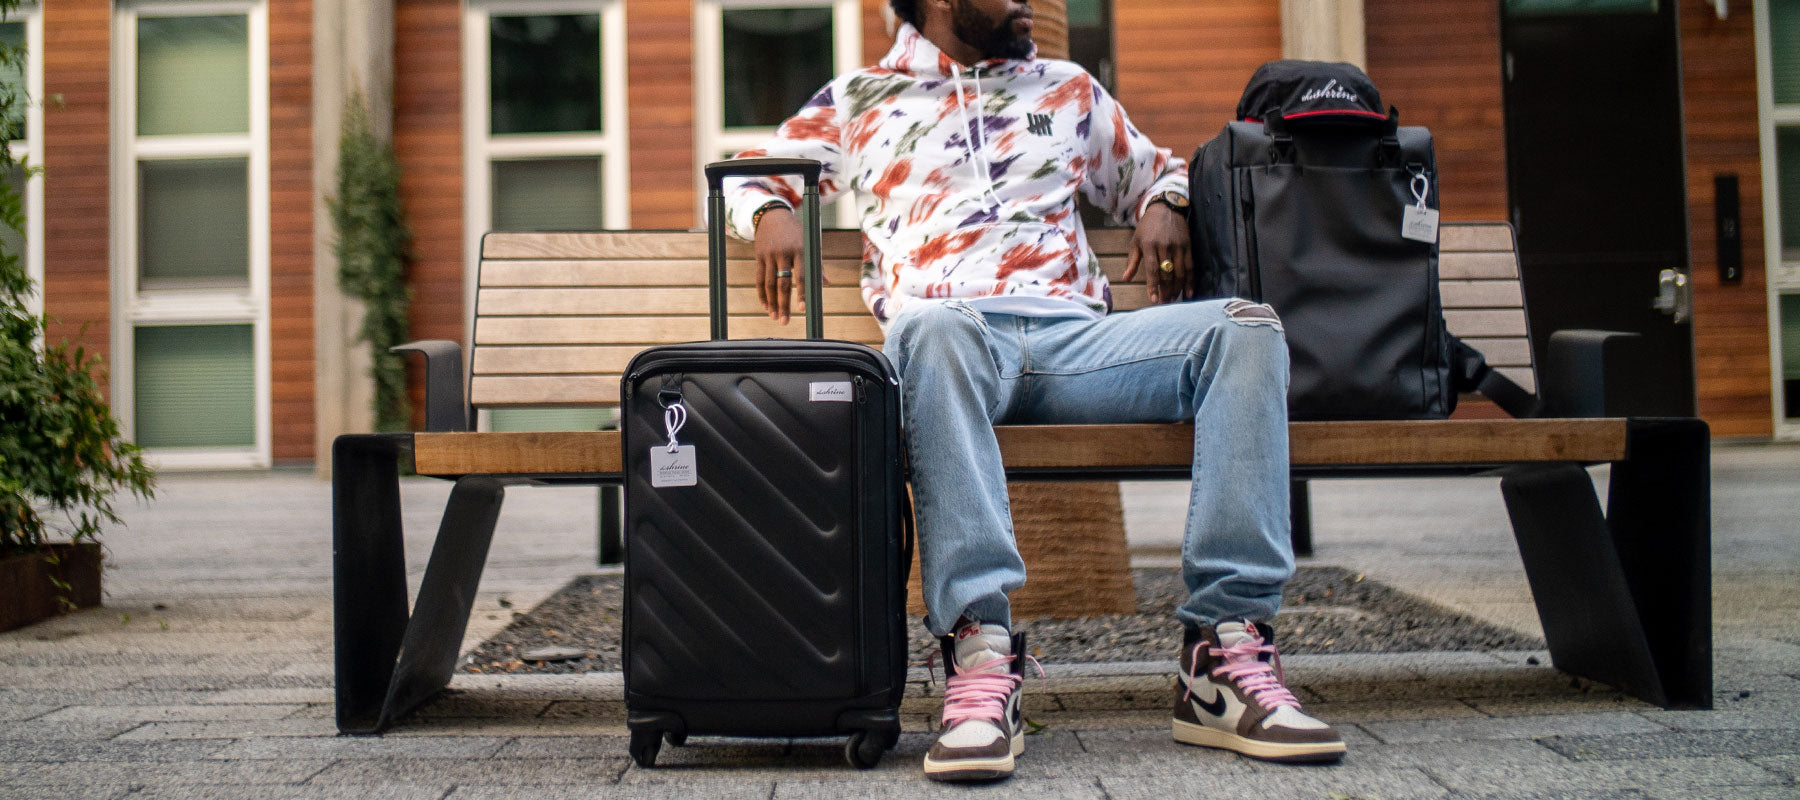 The Shrine drops new 4 wheel spinner luggage